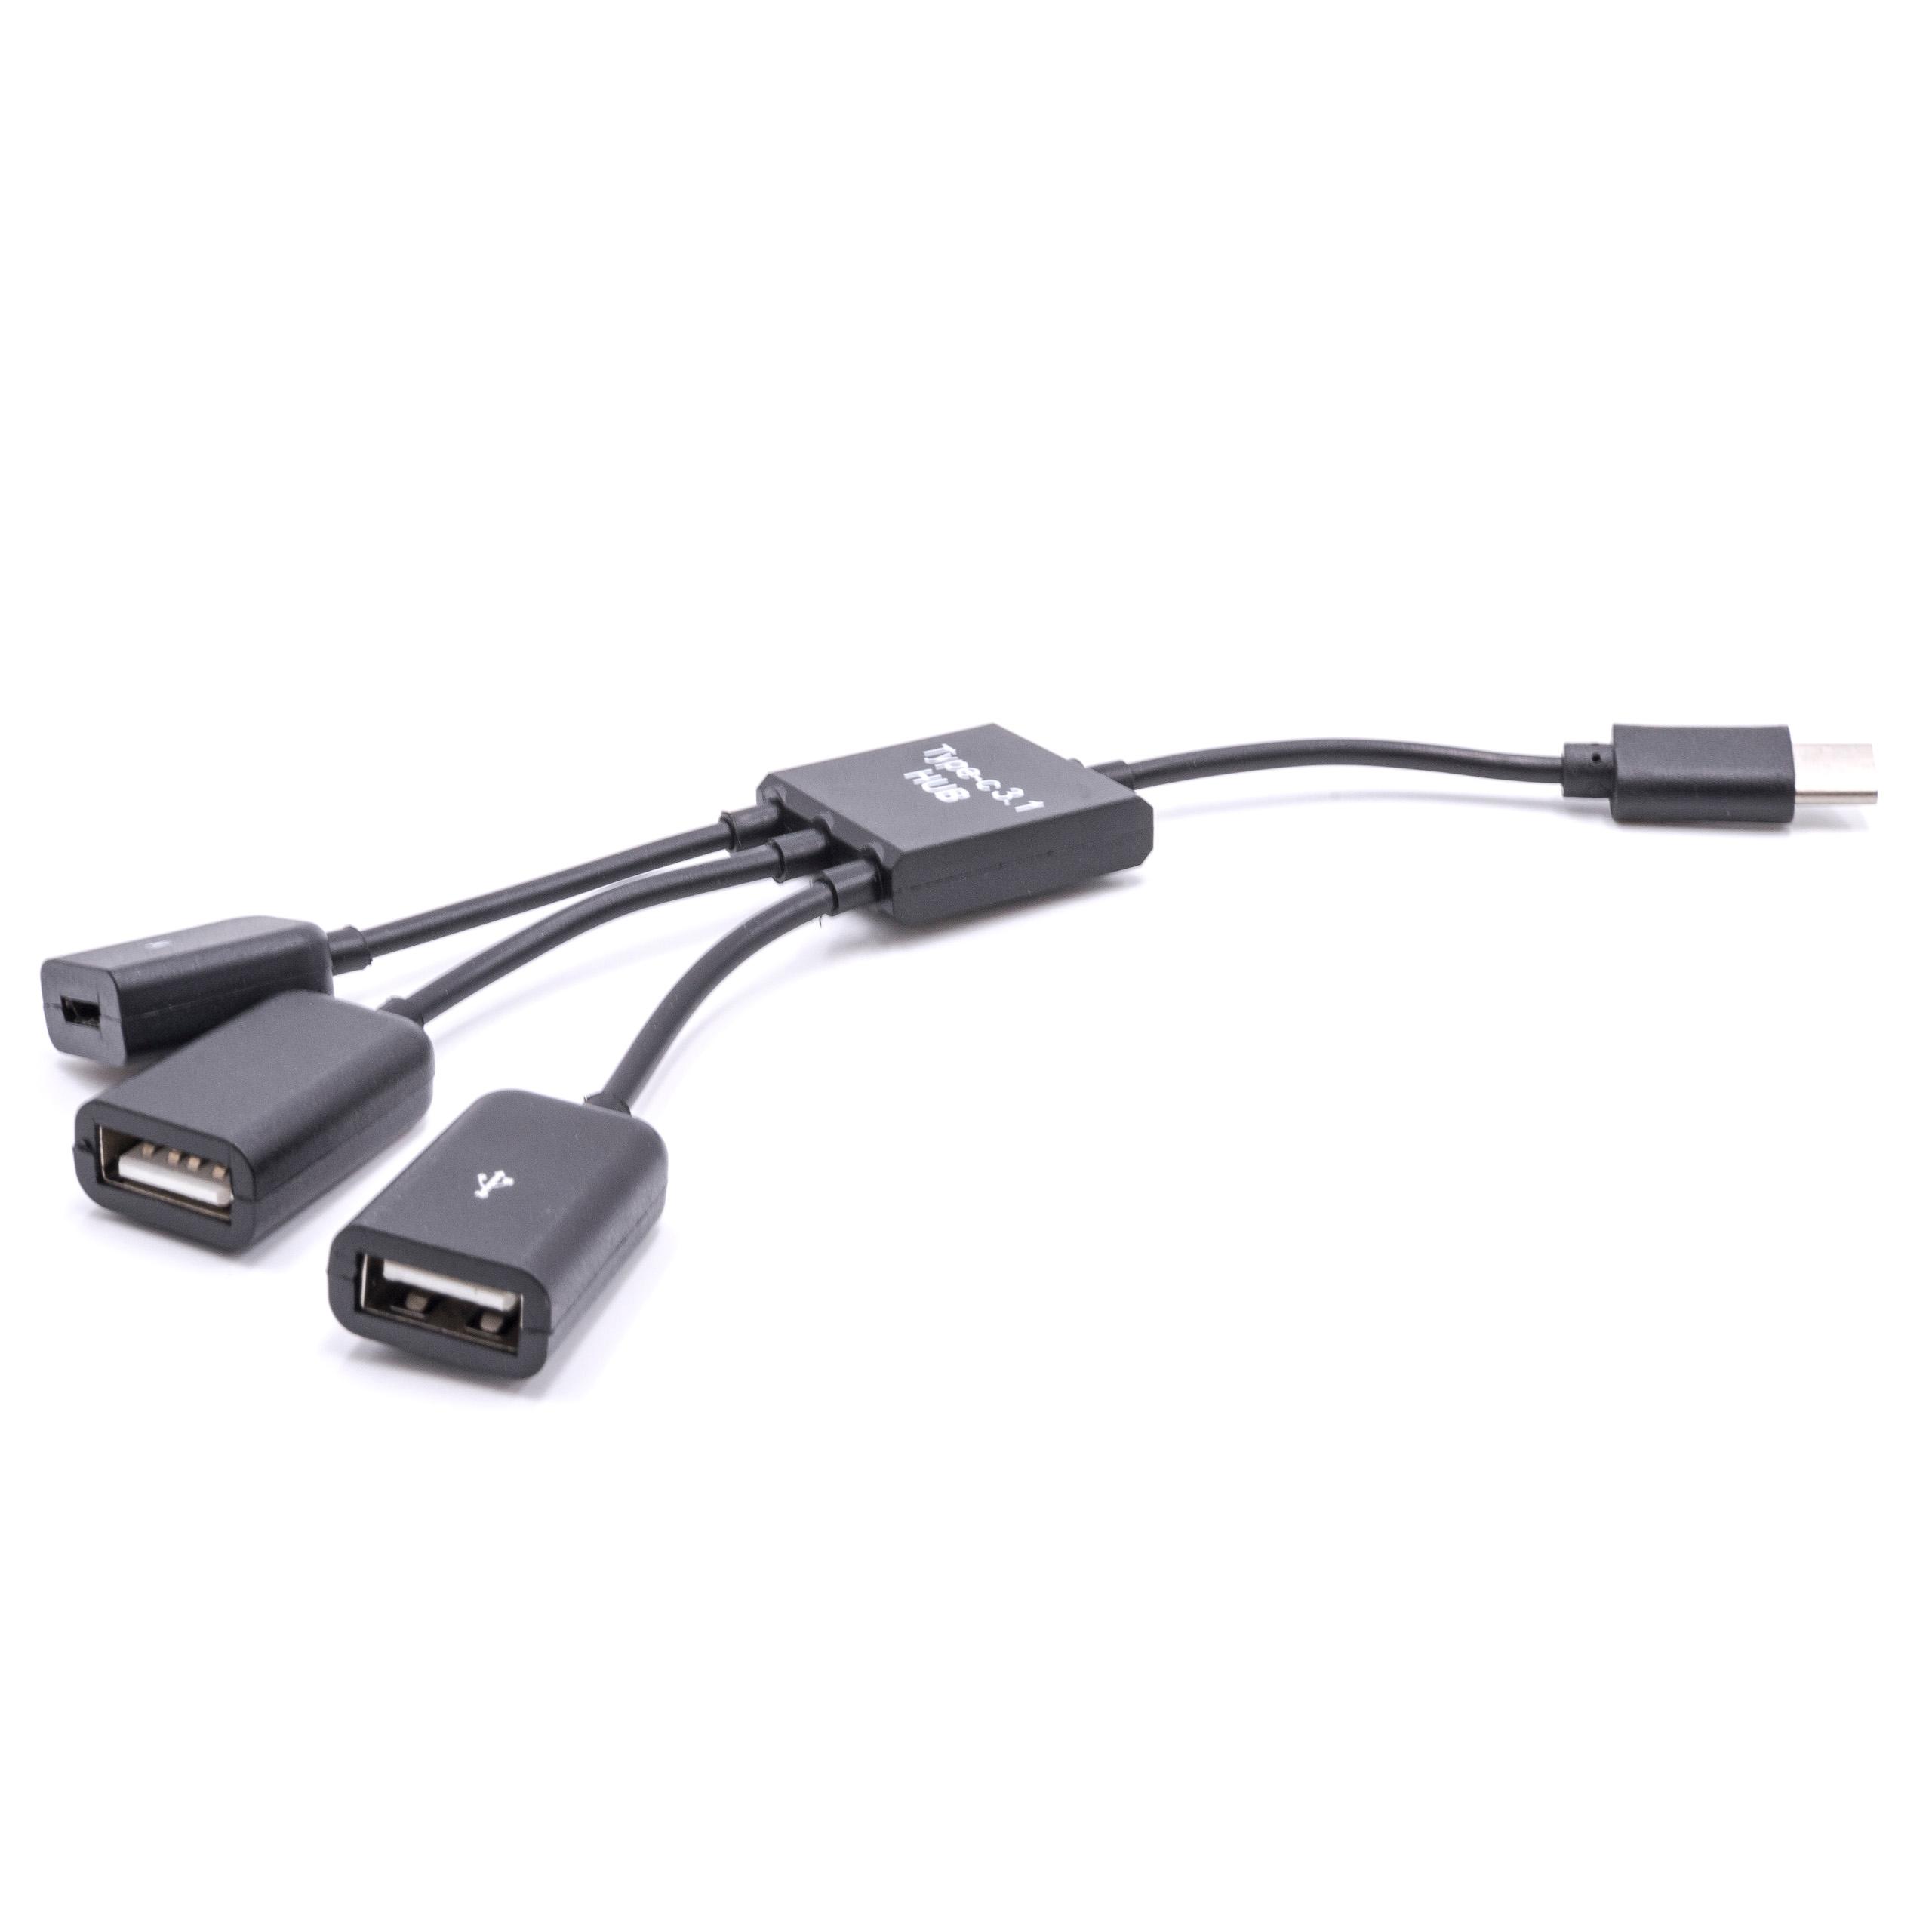 Adapter OTG USB type C (male) to micro USB port (female), 2x USB port (female) for smartphone, tablet, netbook